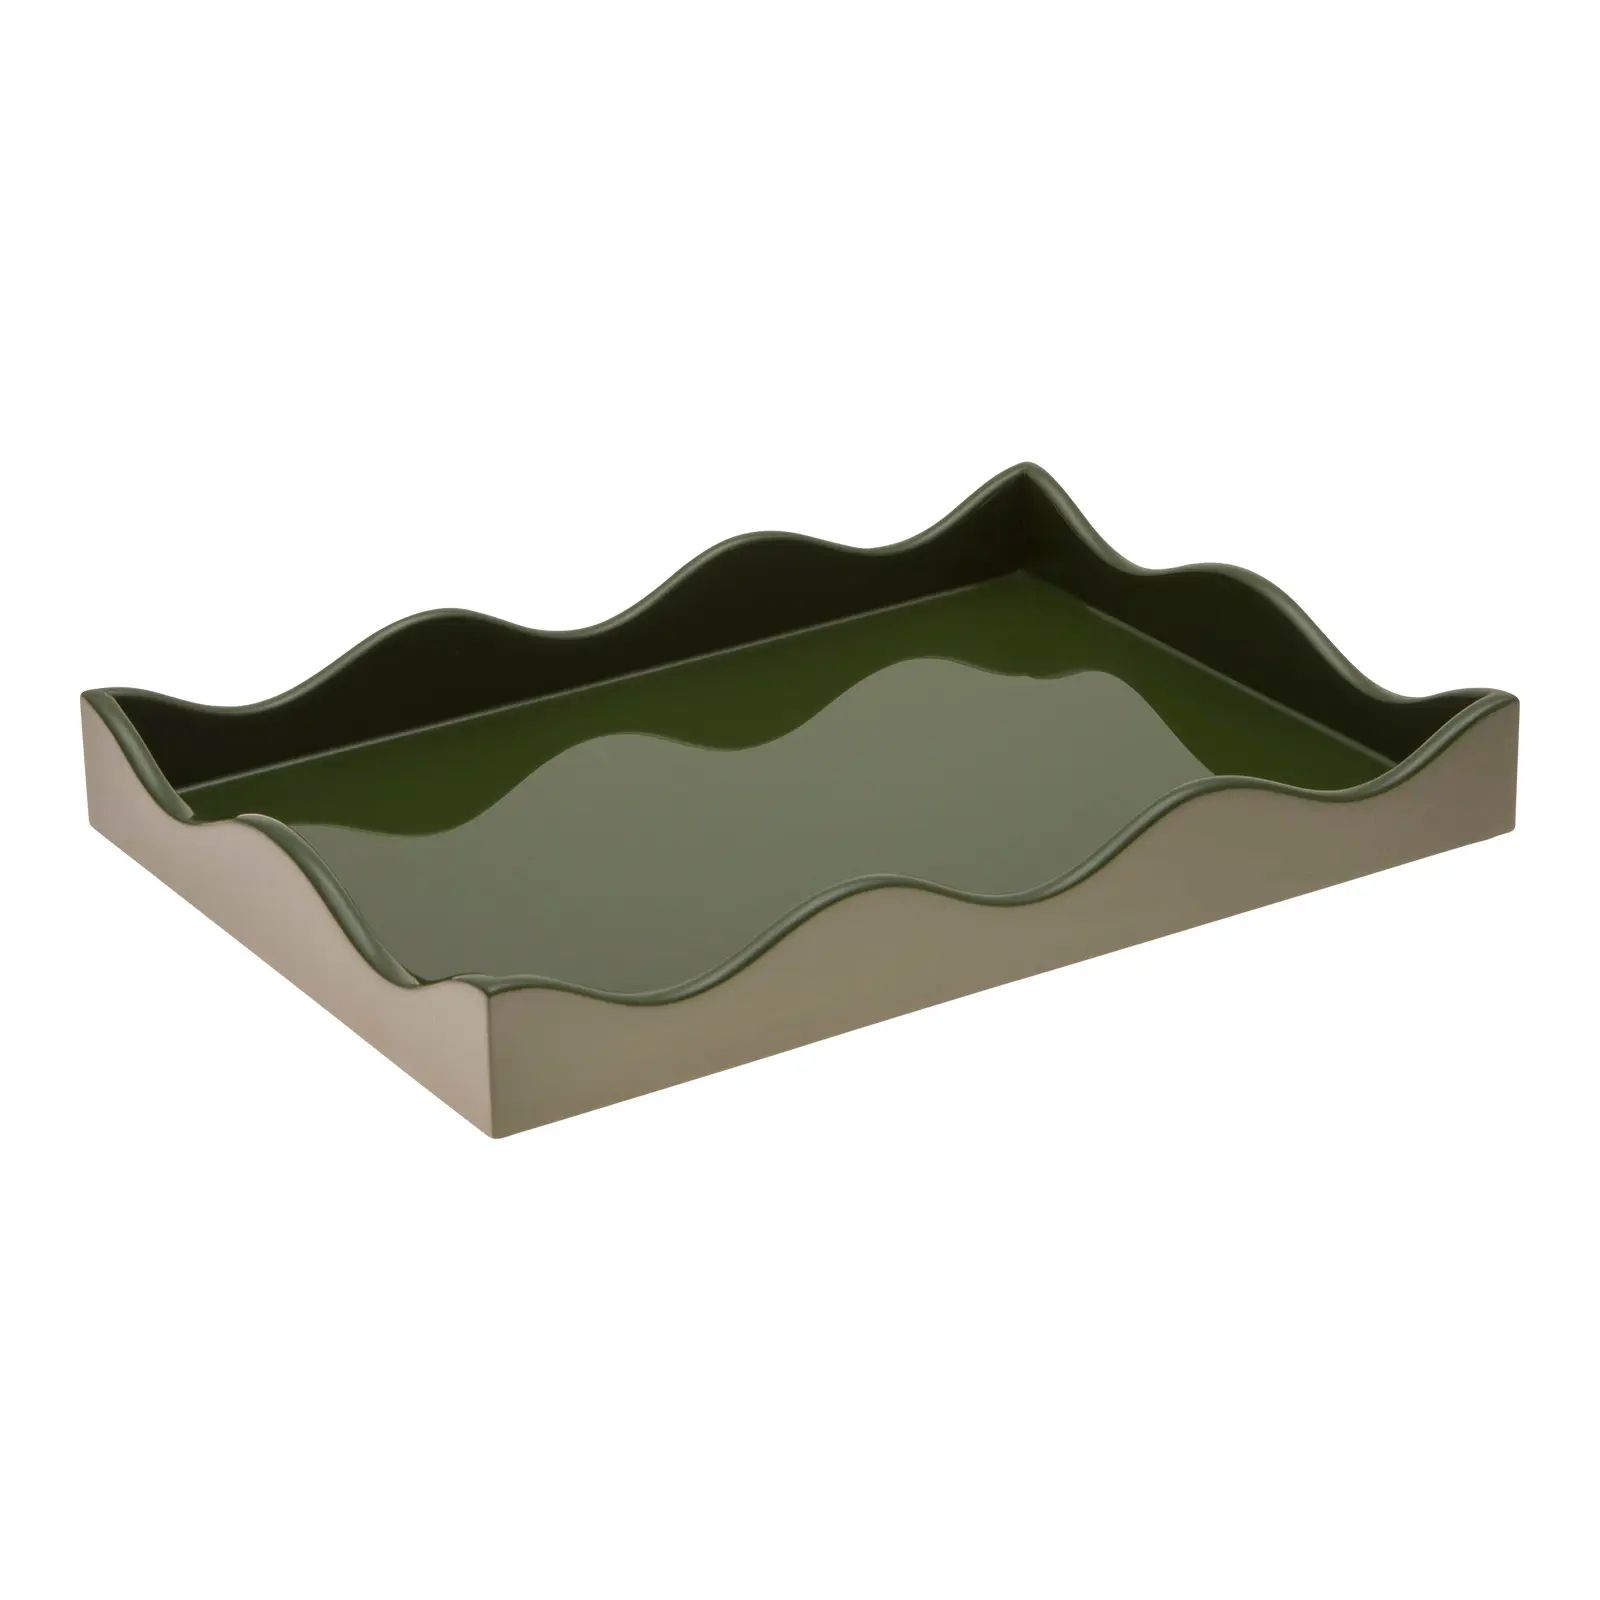 Rita Konig for The Lacquer Company Belles Rives Medium Olive Tray | Chairish